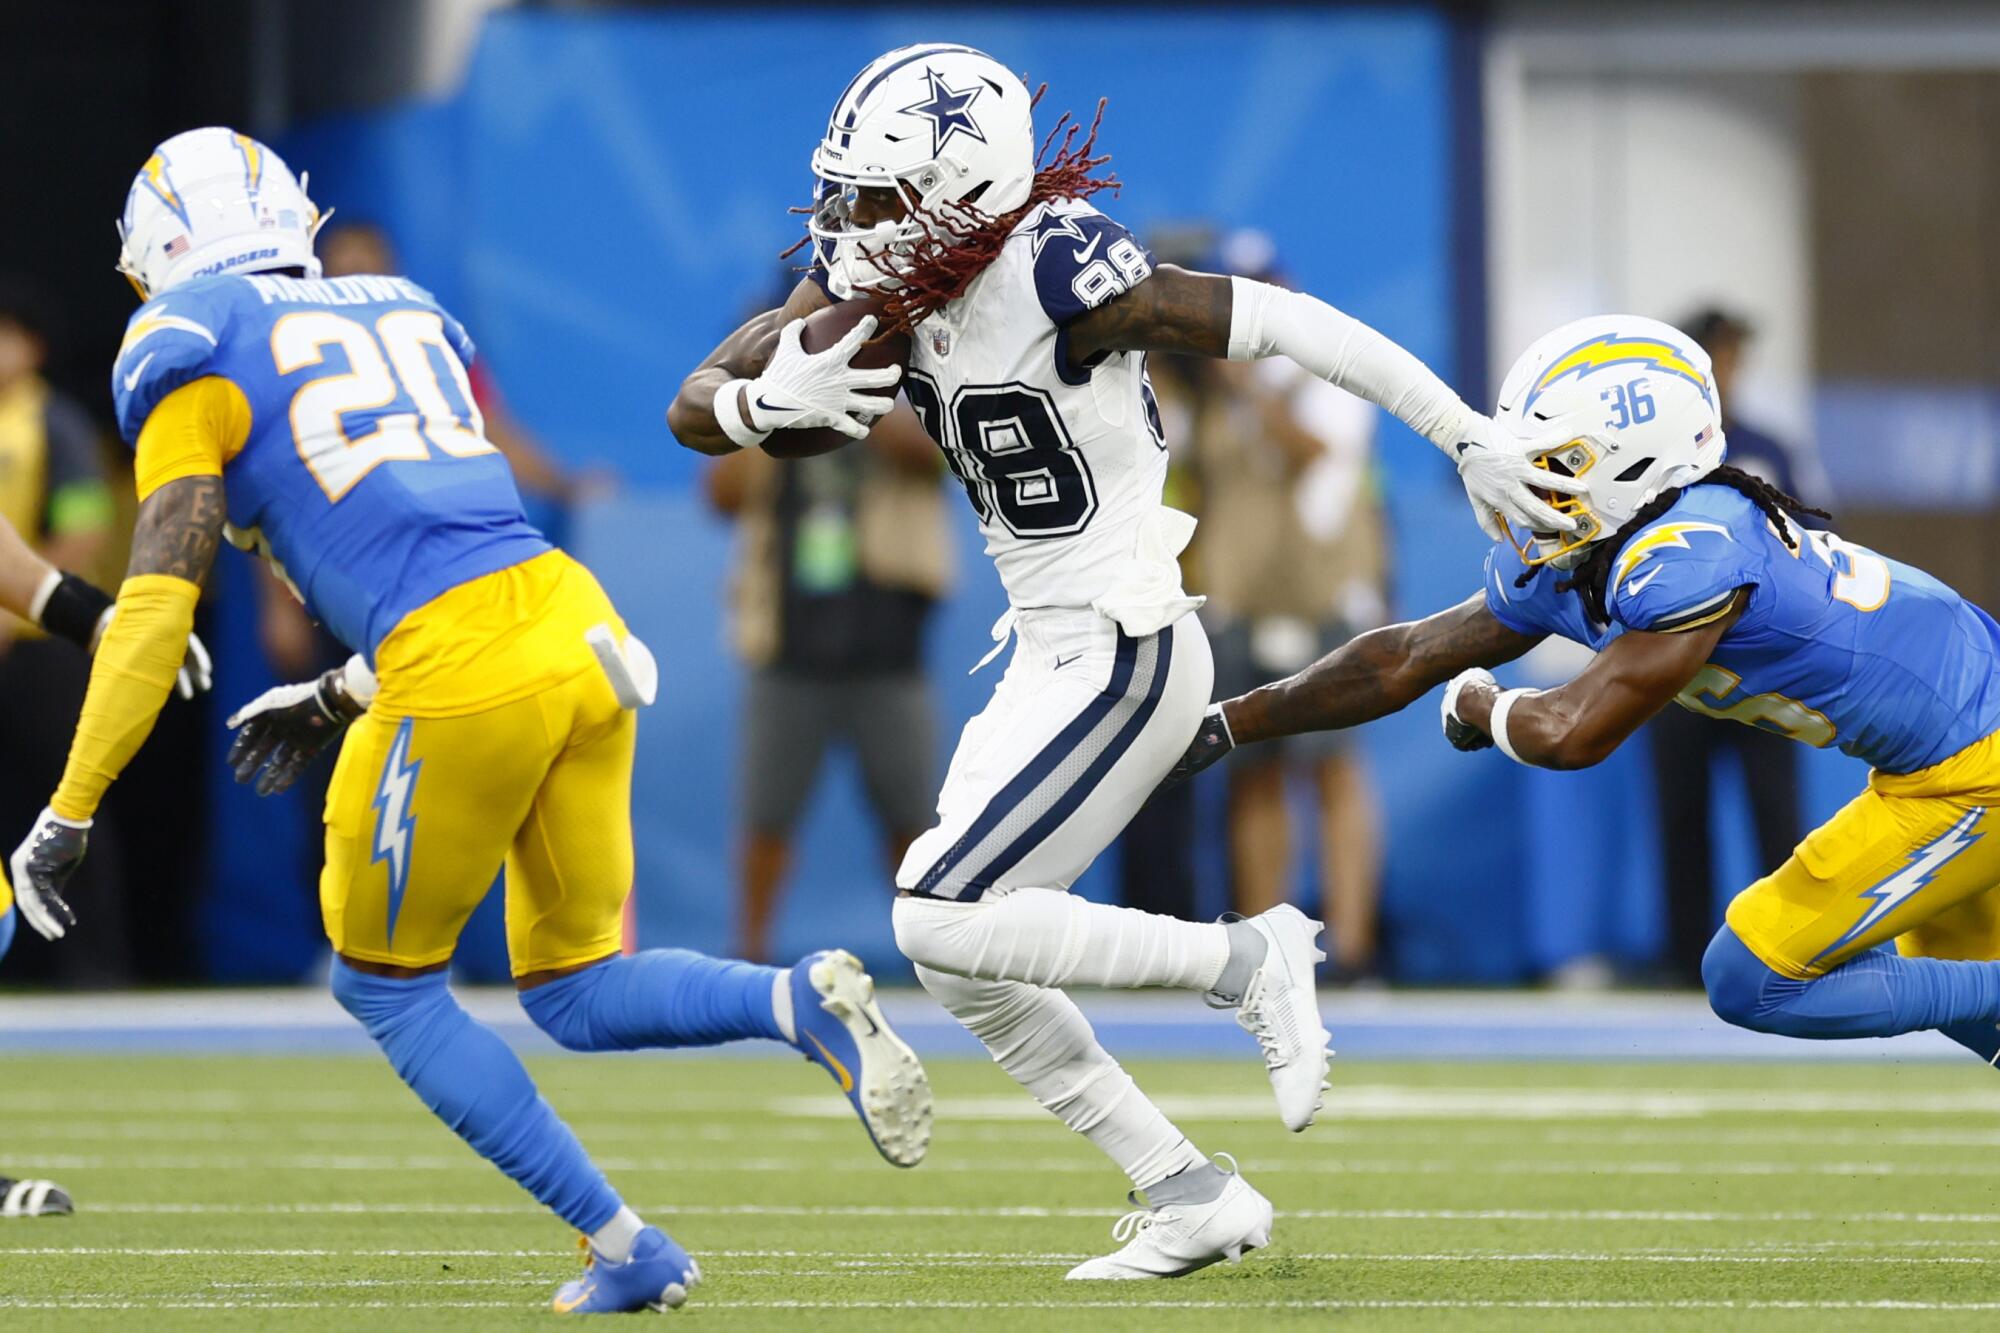 Watch the Cowboys on Monday Night: What channel is ABC in Dallas?